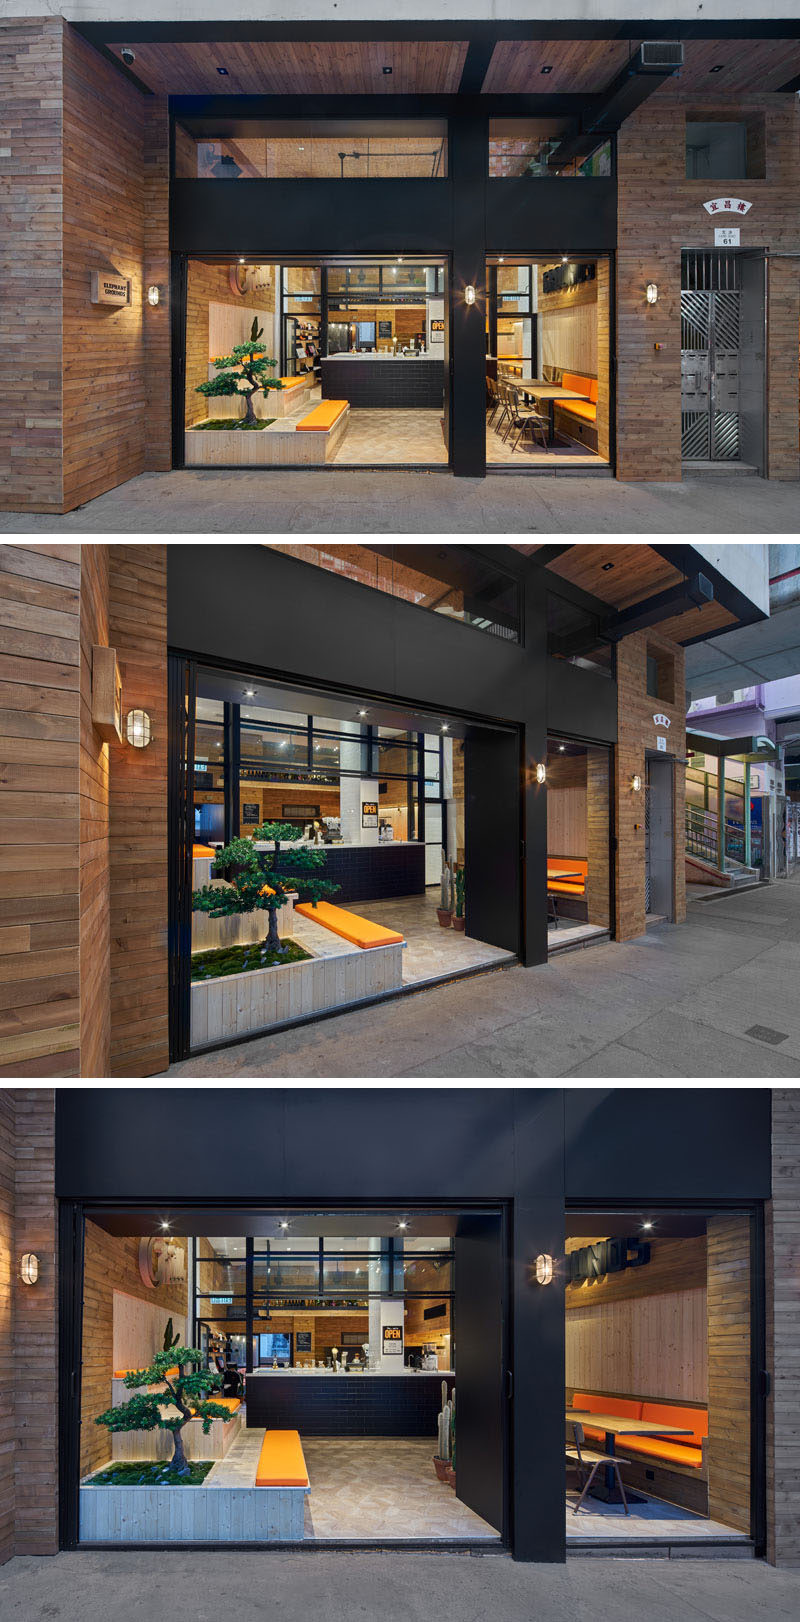 The facade of this modern coffee shop is open to the street and defined by a dual black door frame surrounded by wood.